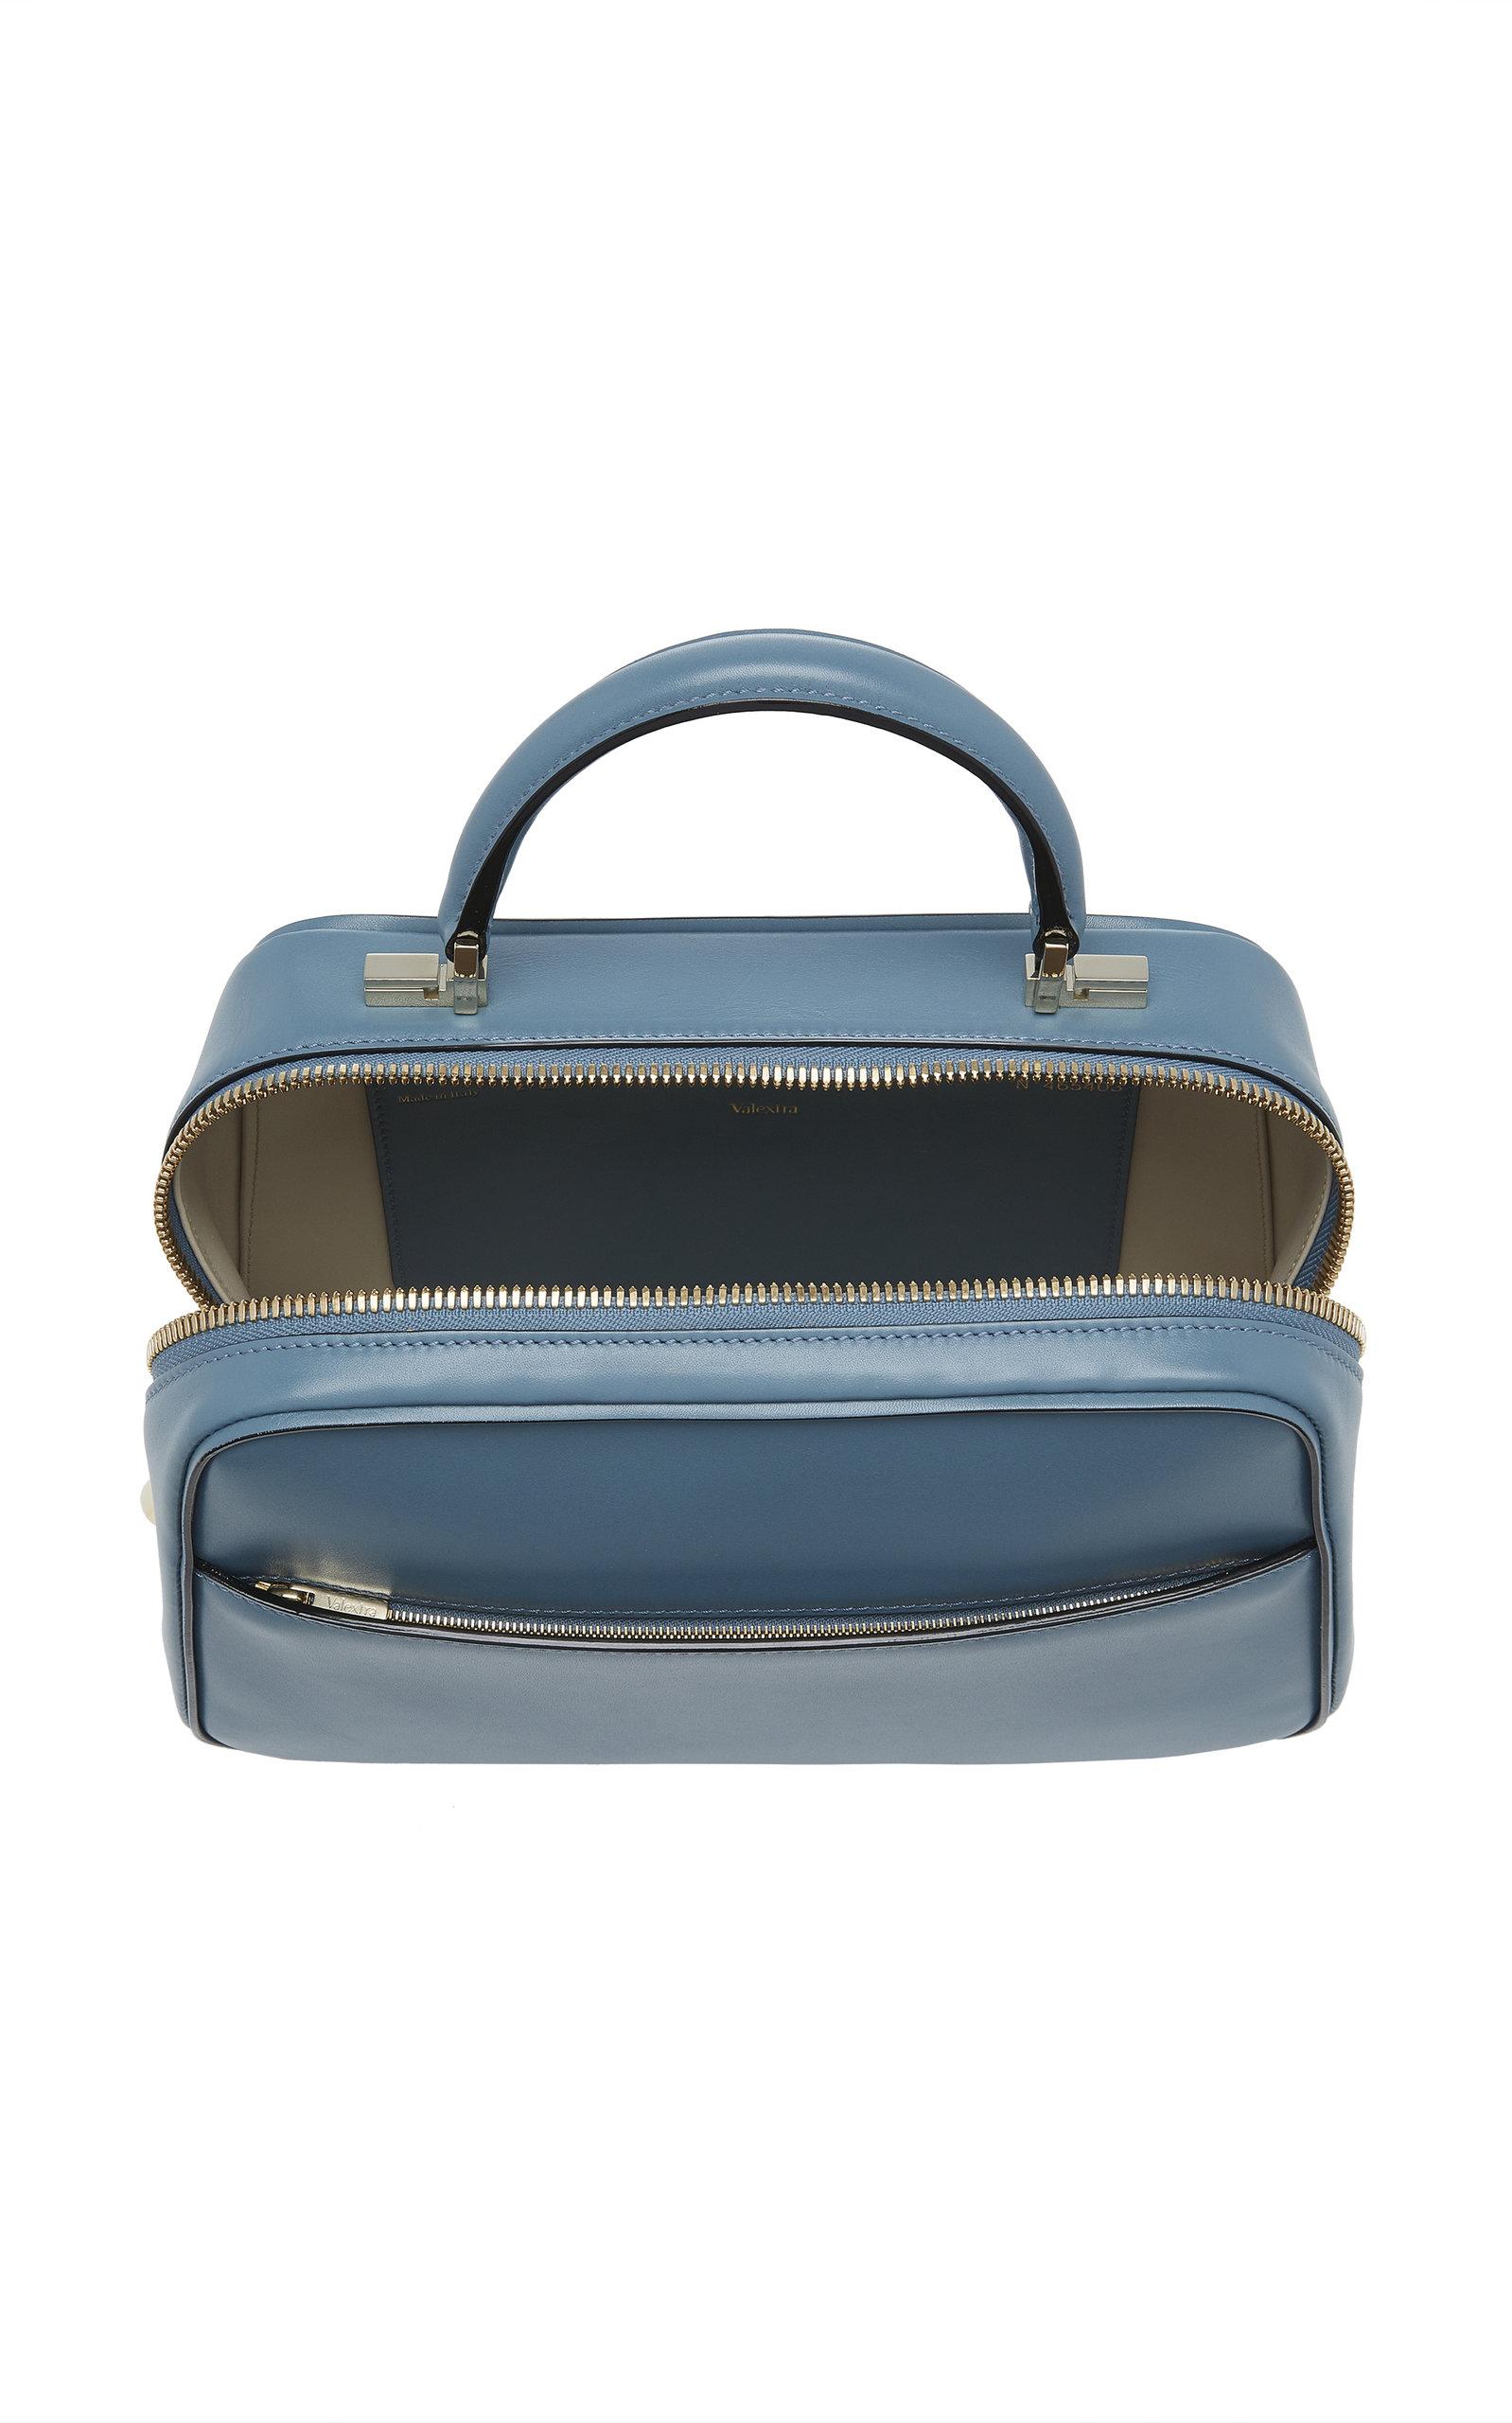 Valextra Serie S Leather Bag in Blue - Lyst